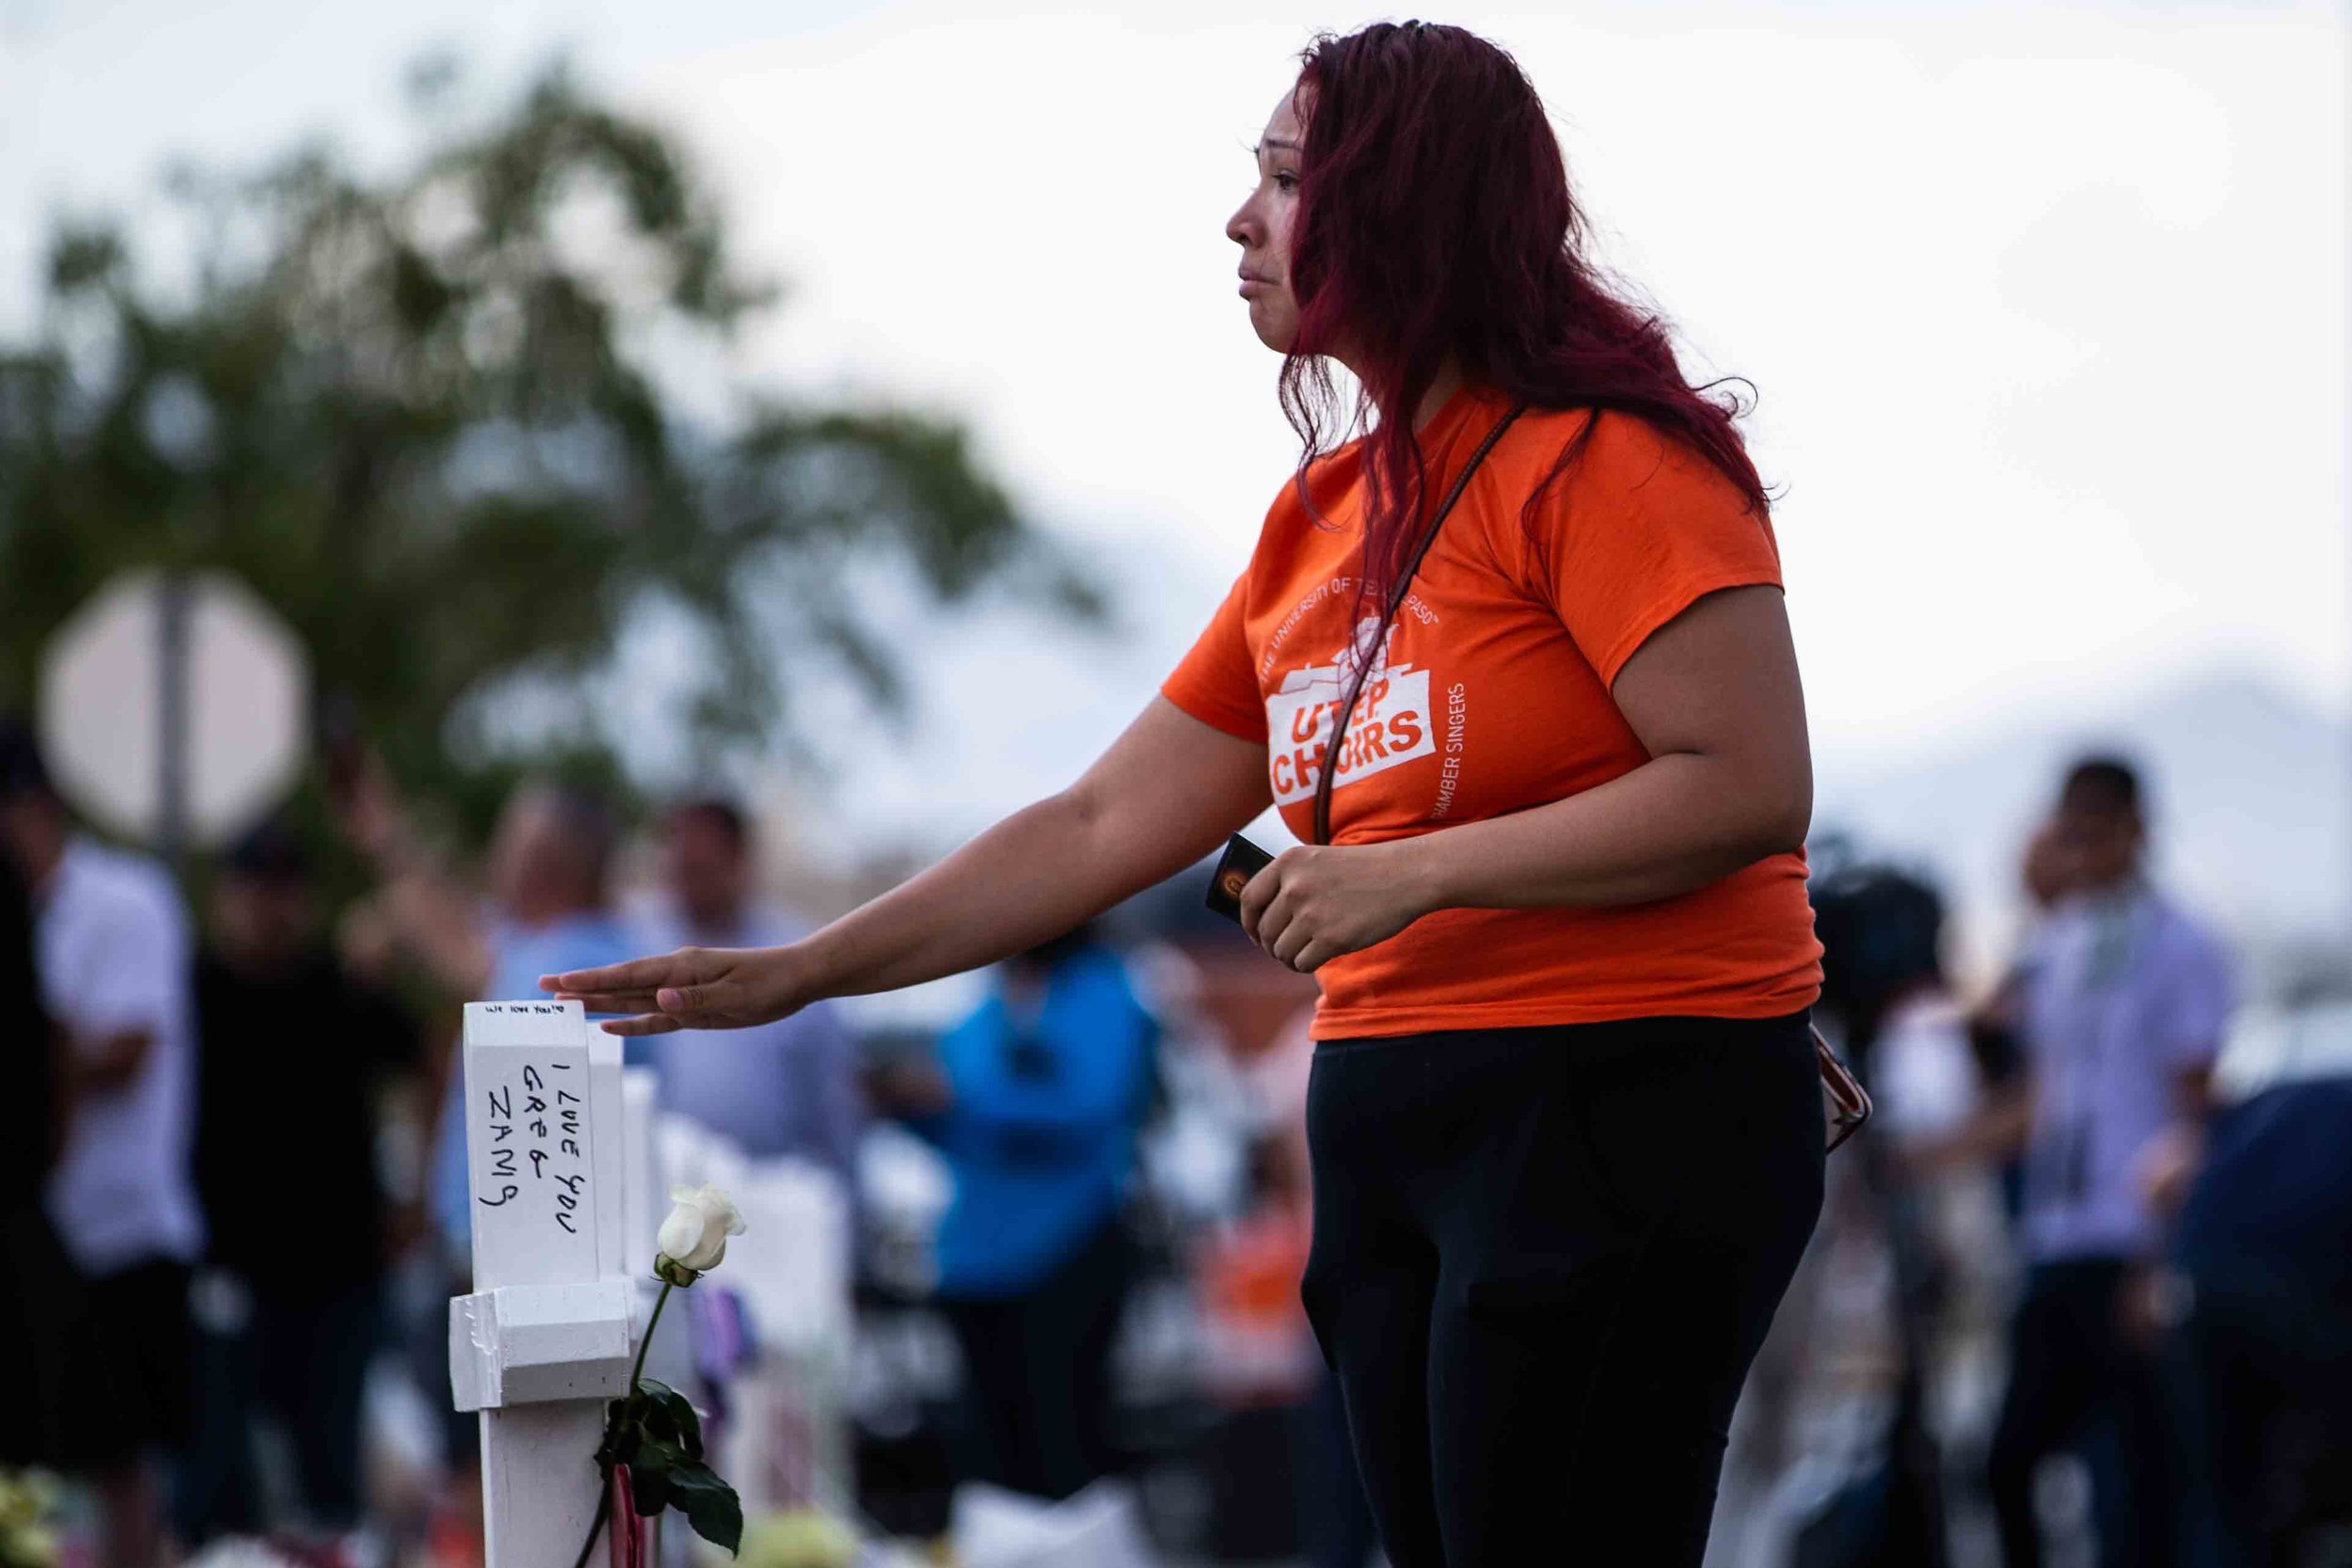  A woman approaches the crosses with the names of the victims of the mass shooting occurred in Walmart last Saturday morning have been placed on the scene to honor their memory in El Paso on Monday, August 5, 2019. 